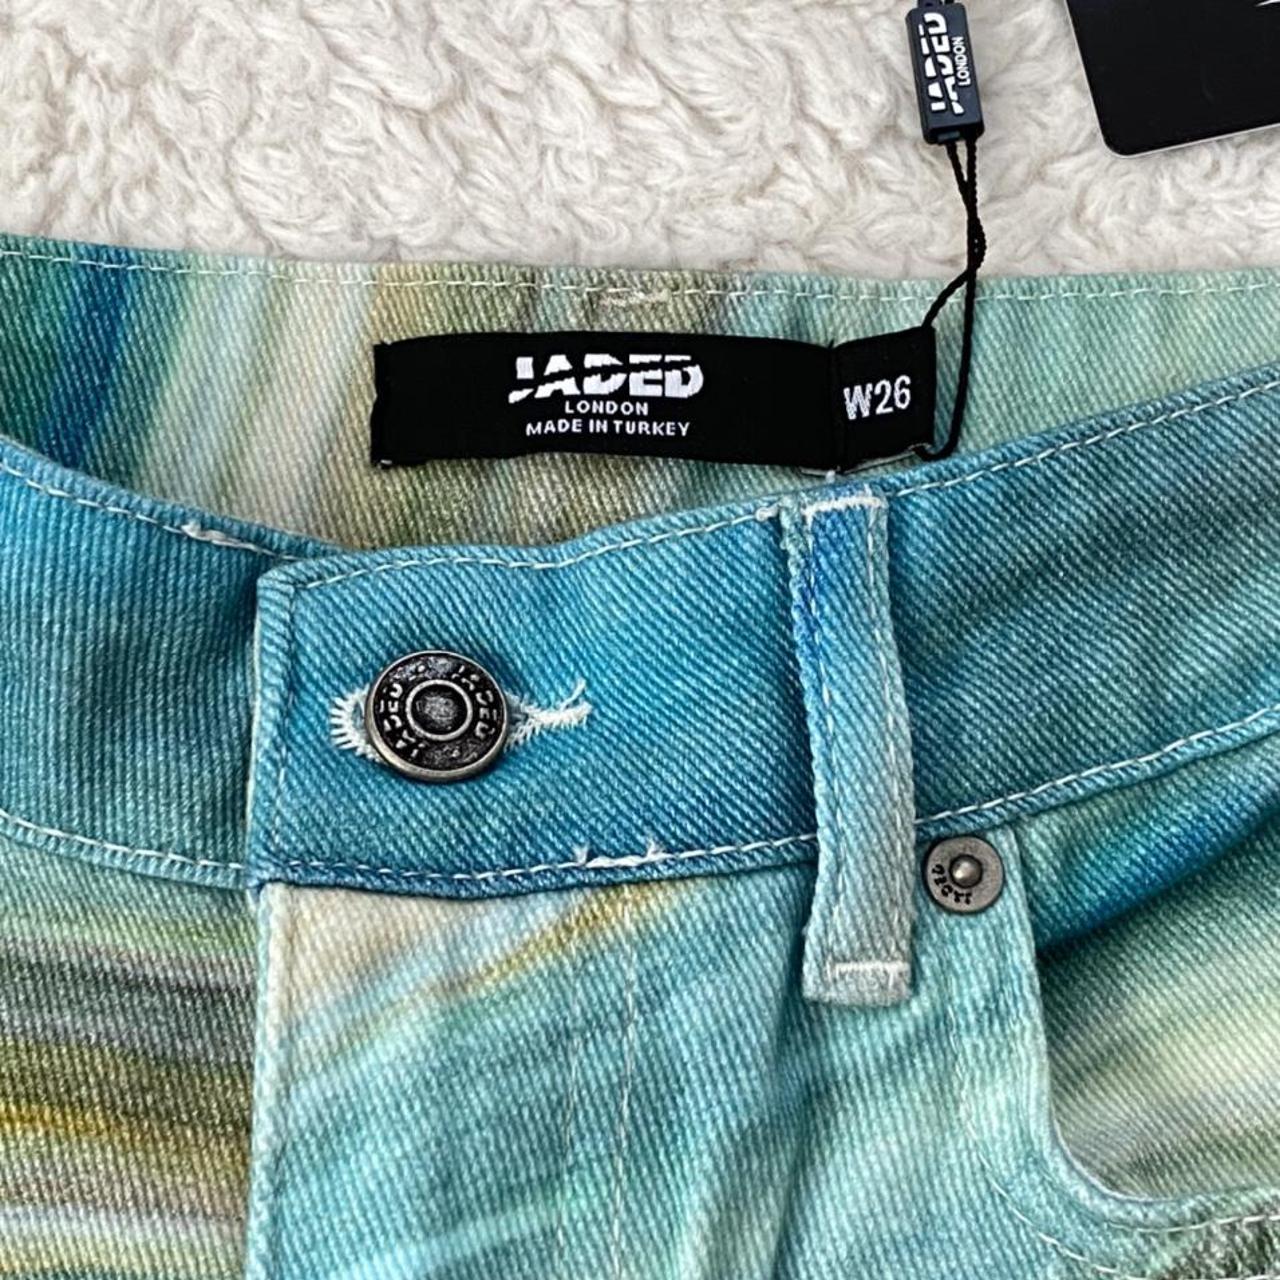 Product Image 3 - Jaded london jeans 
Size 26
Bnwt

‼️AWAY